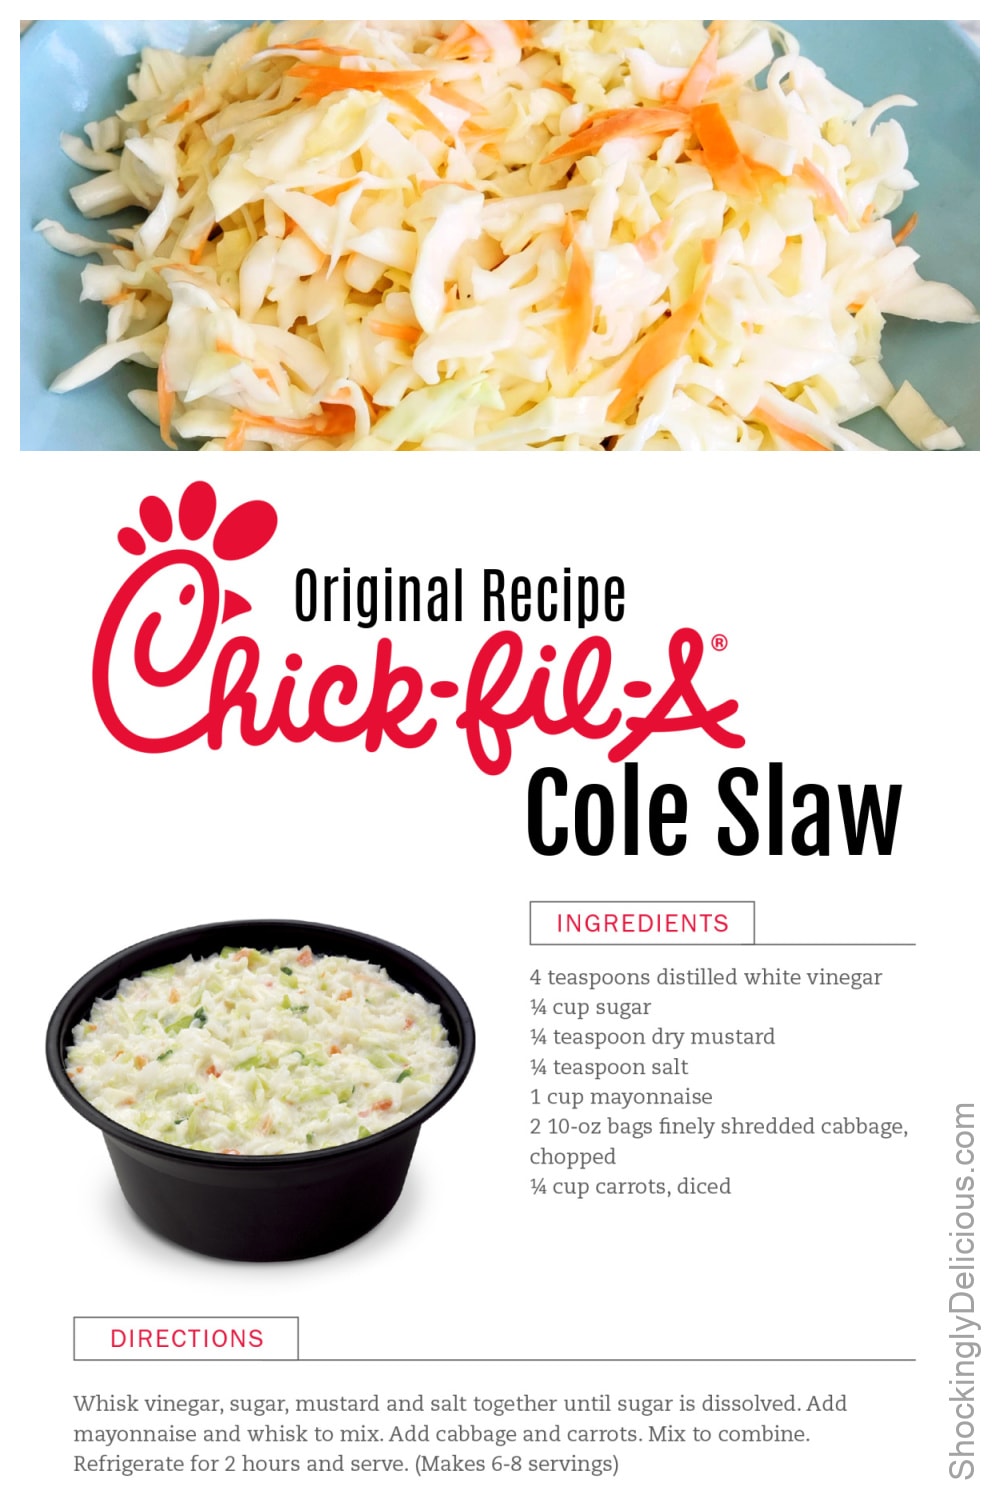 Photo collage of Chick-fil-a Cole Slaw original discontinued recipe on ShockinglyDelicious.com